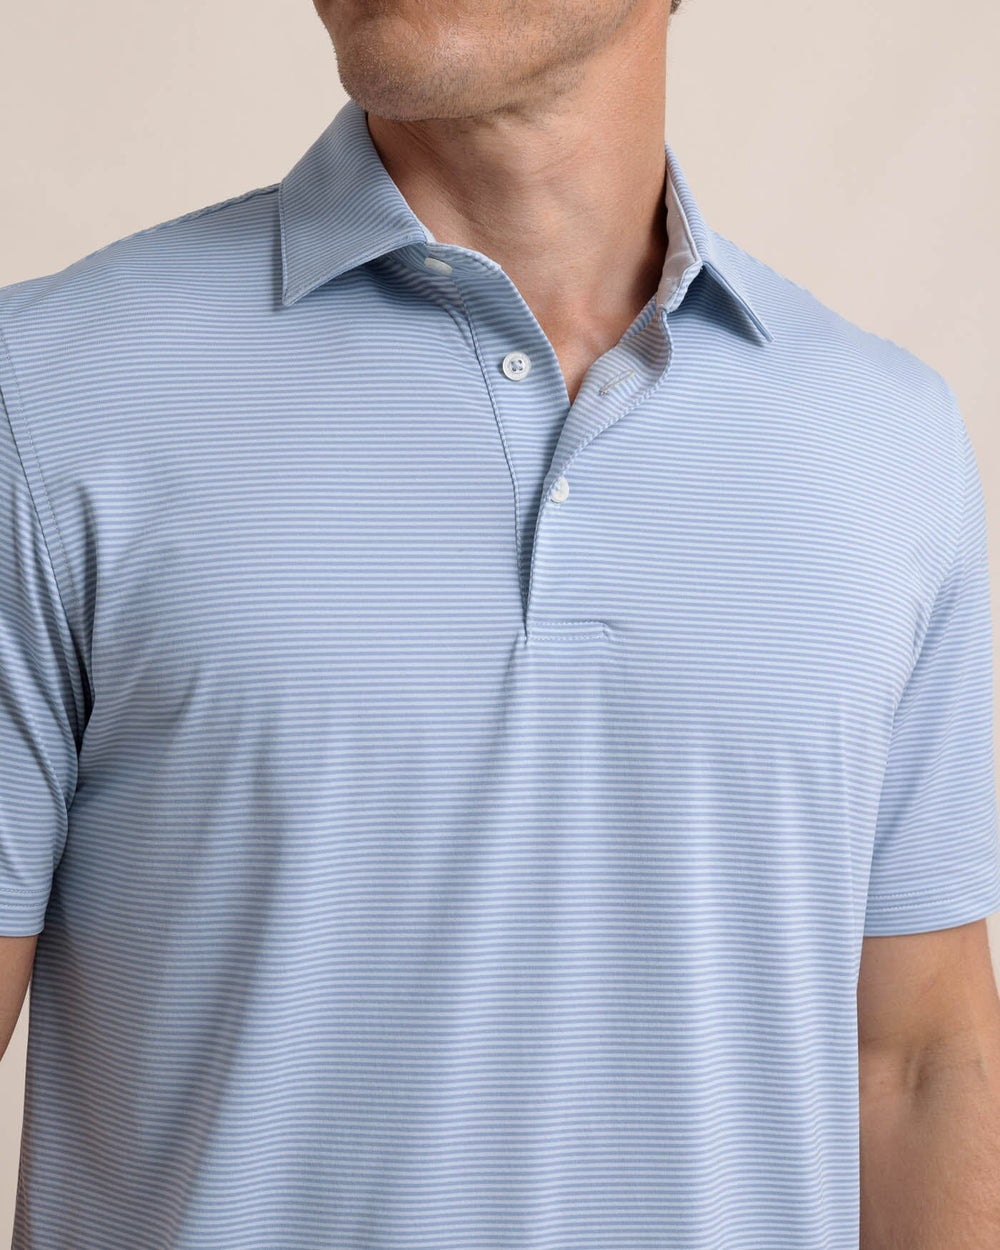 The detail view of the Southern Tide brrr-eeze Meadowbrook Stripe Polo by Southern Tide - Triumph Blue